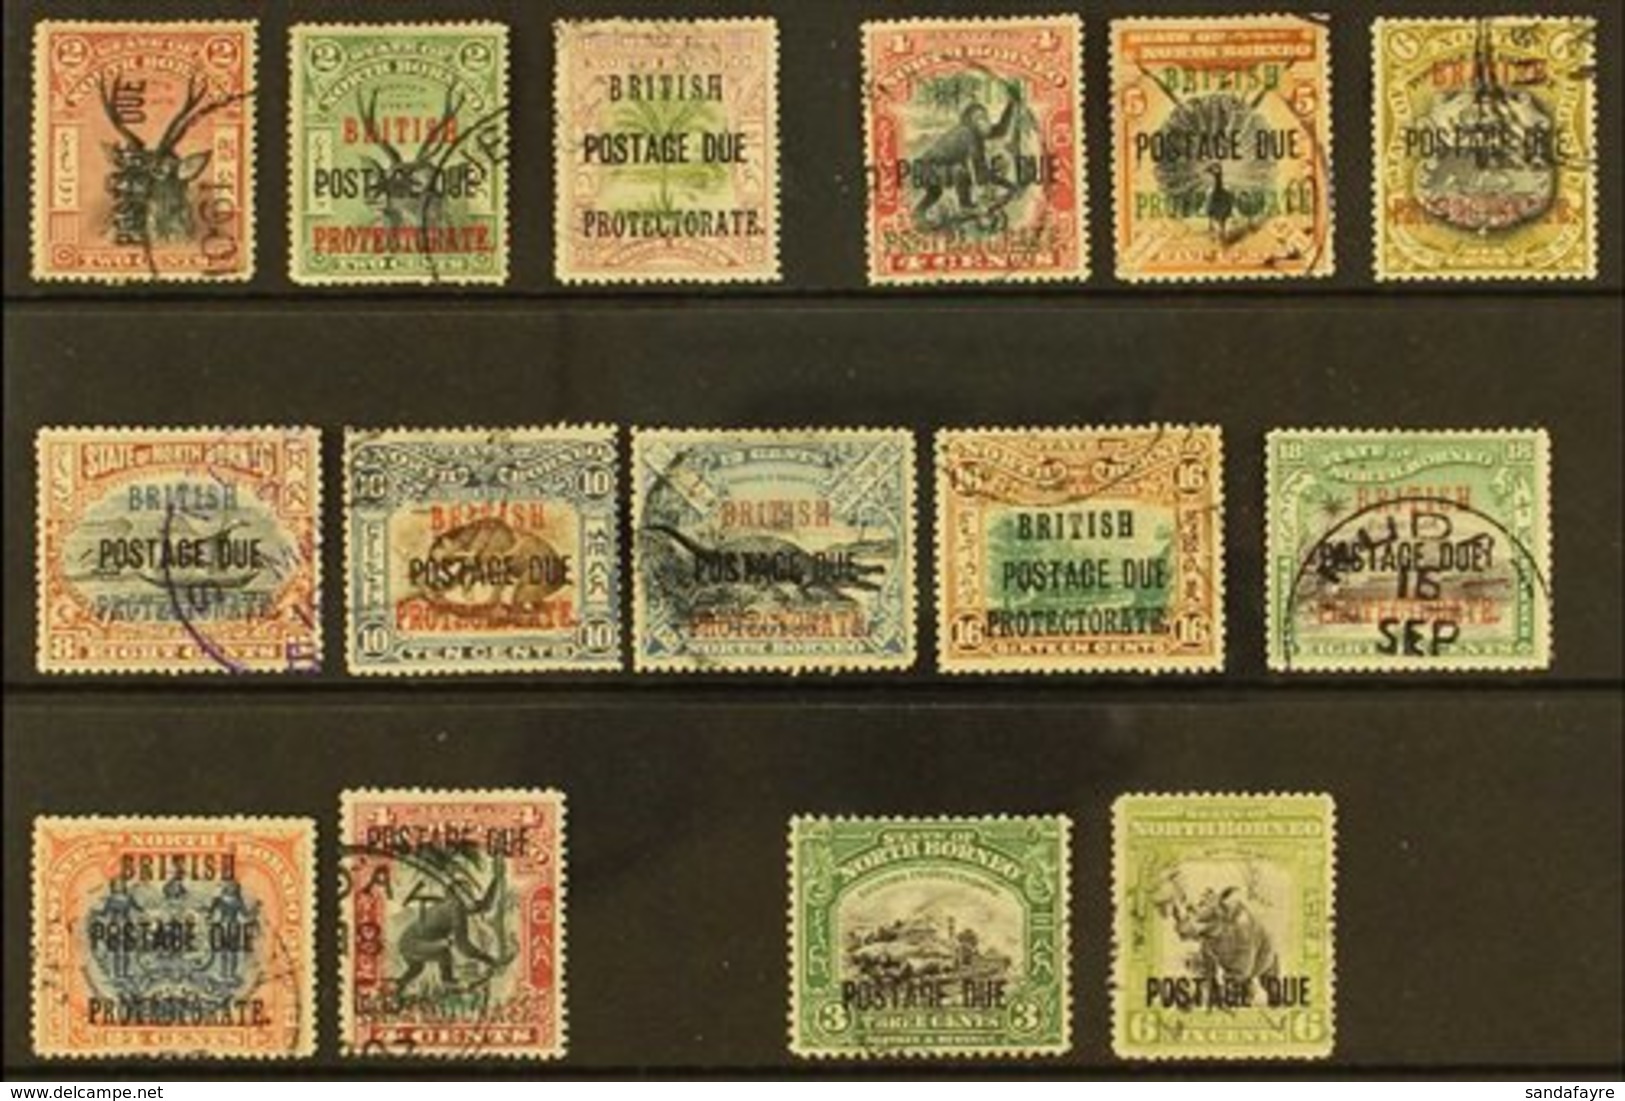 POSTAGE DUES  1897 - 1930 Fine Postally Used Selection With Cds Cancels Including 1902 Vals To 24c, 1906 4c Black And Ca - Nordborneo (...-1963)